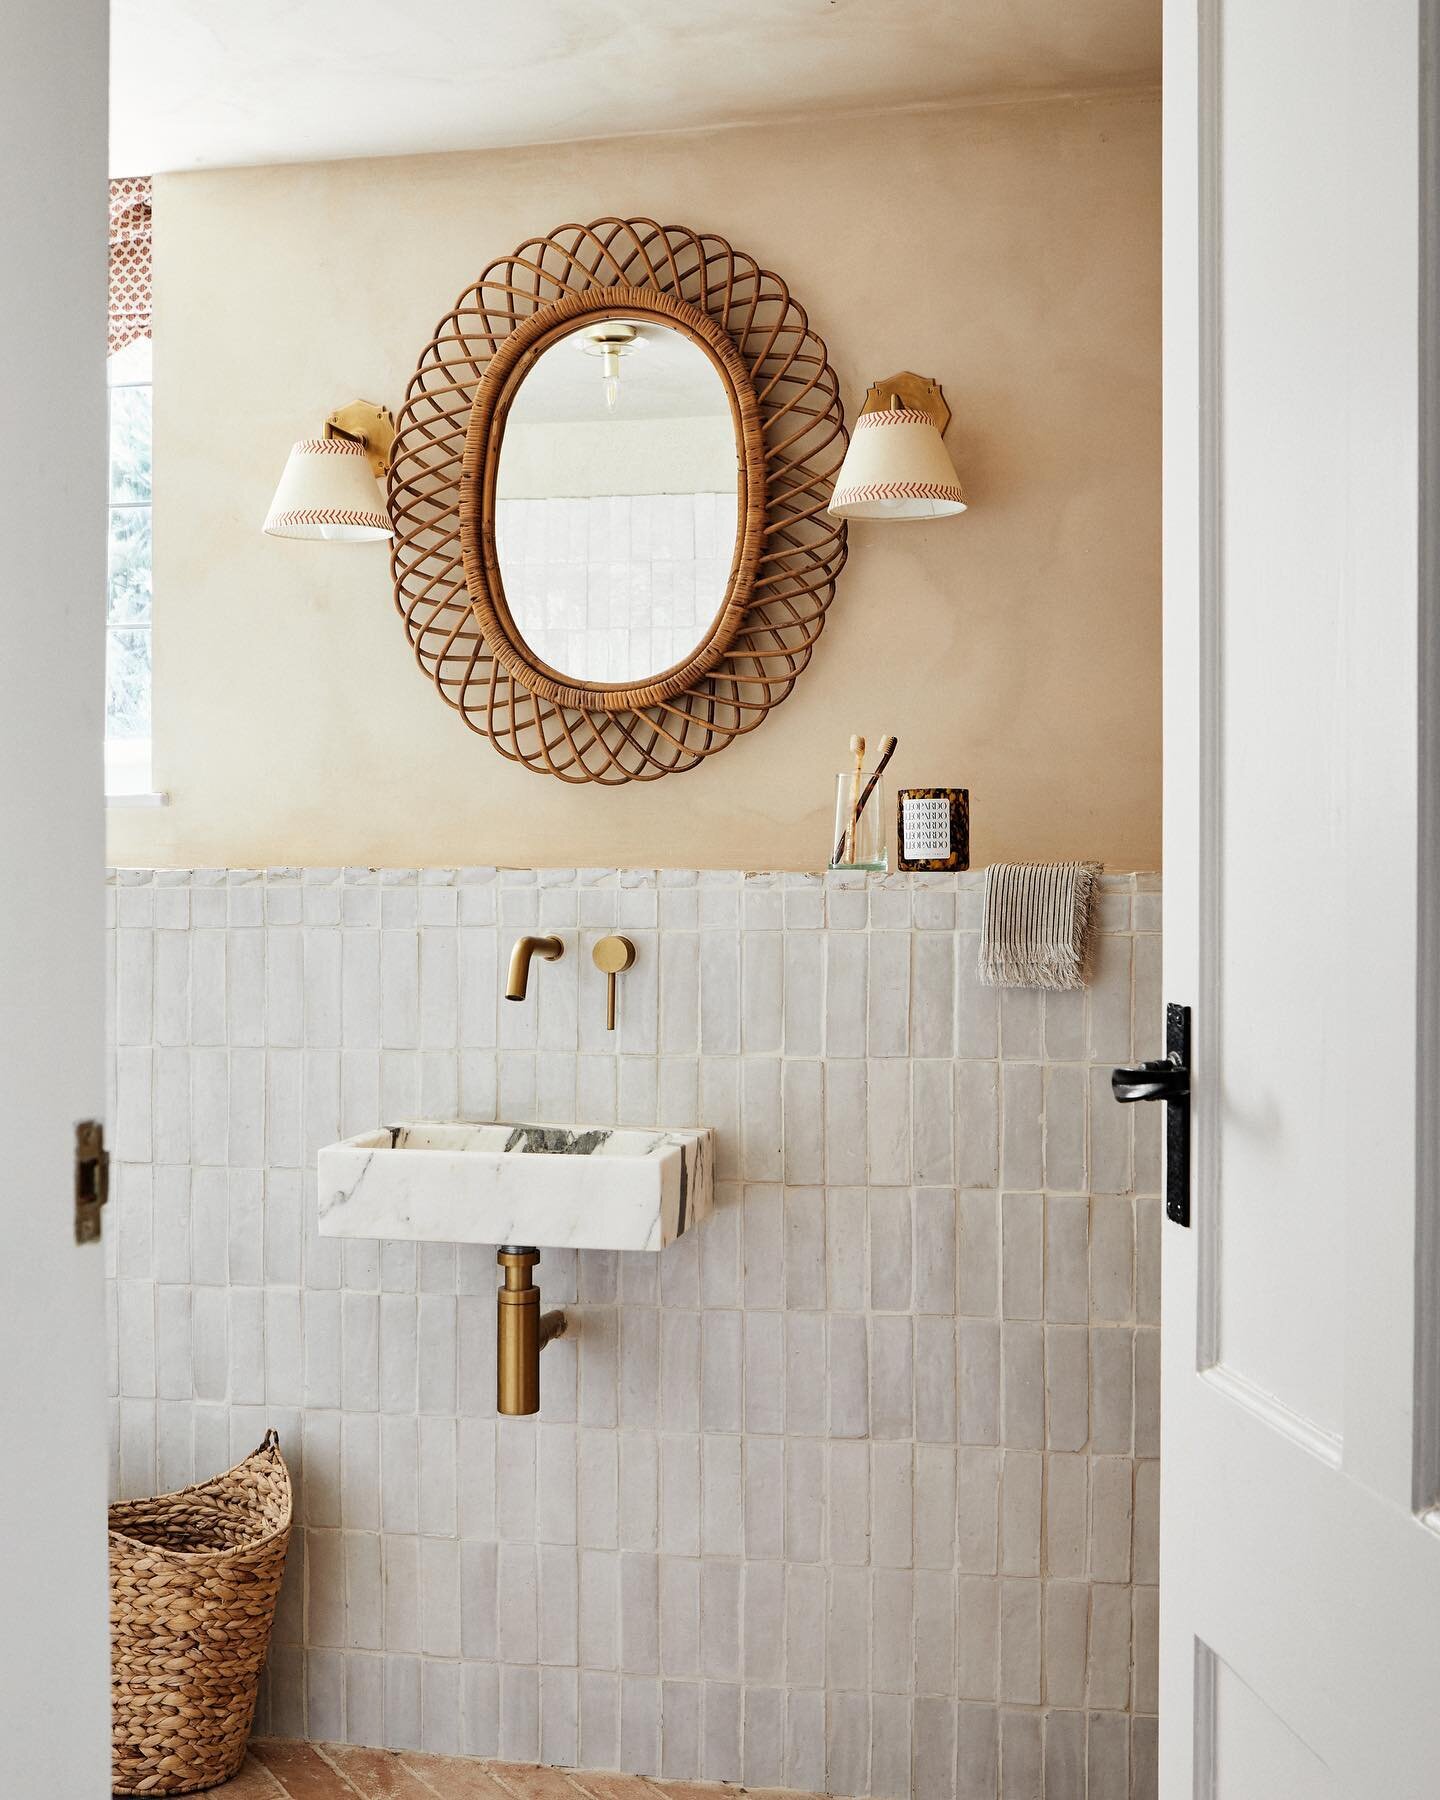 I love this bathroom and all the textures it brings together. For those of you lovely lot asking, here is the other angle of the bathroom that was recently featured in @dominomag ❤️along with the rest of this 16th century Manor House project.
Thanks 